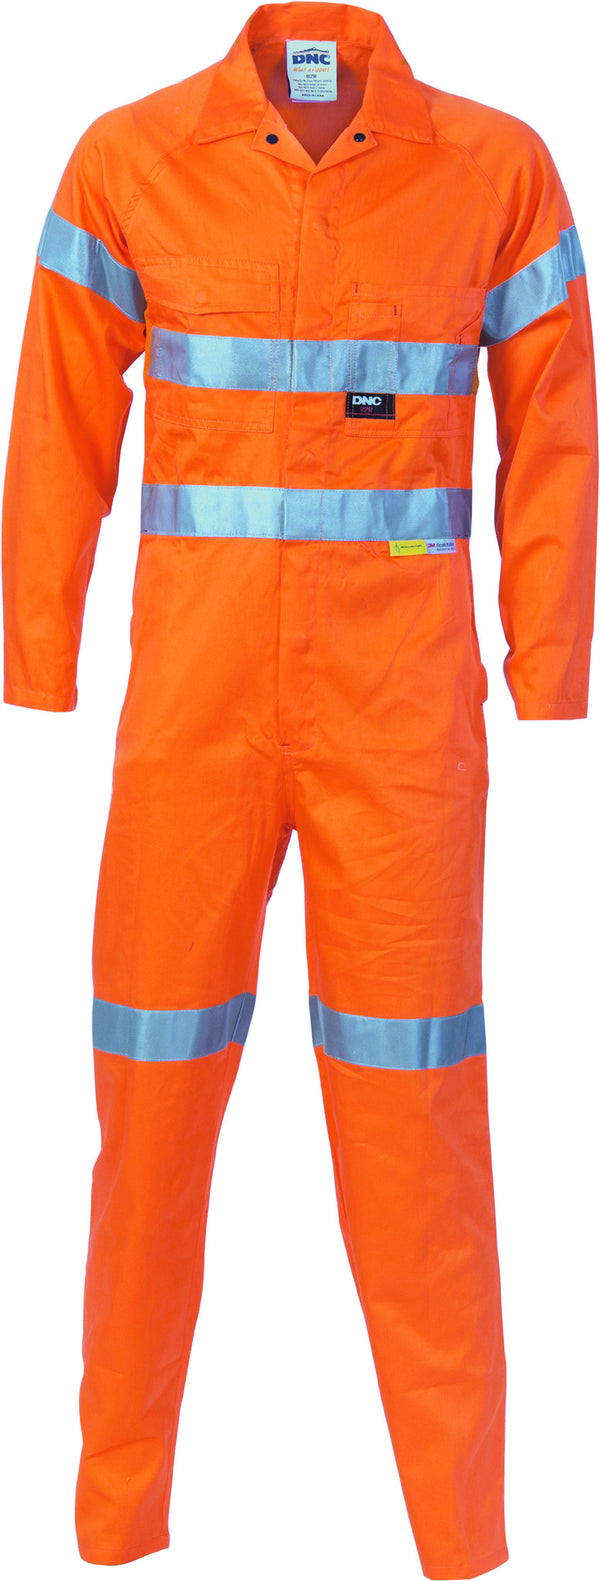 HiVis Cool-Breeze Orange Leightweight Cotton Coverall With 3M Reflective Tape